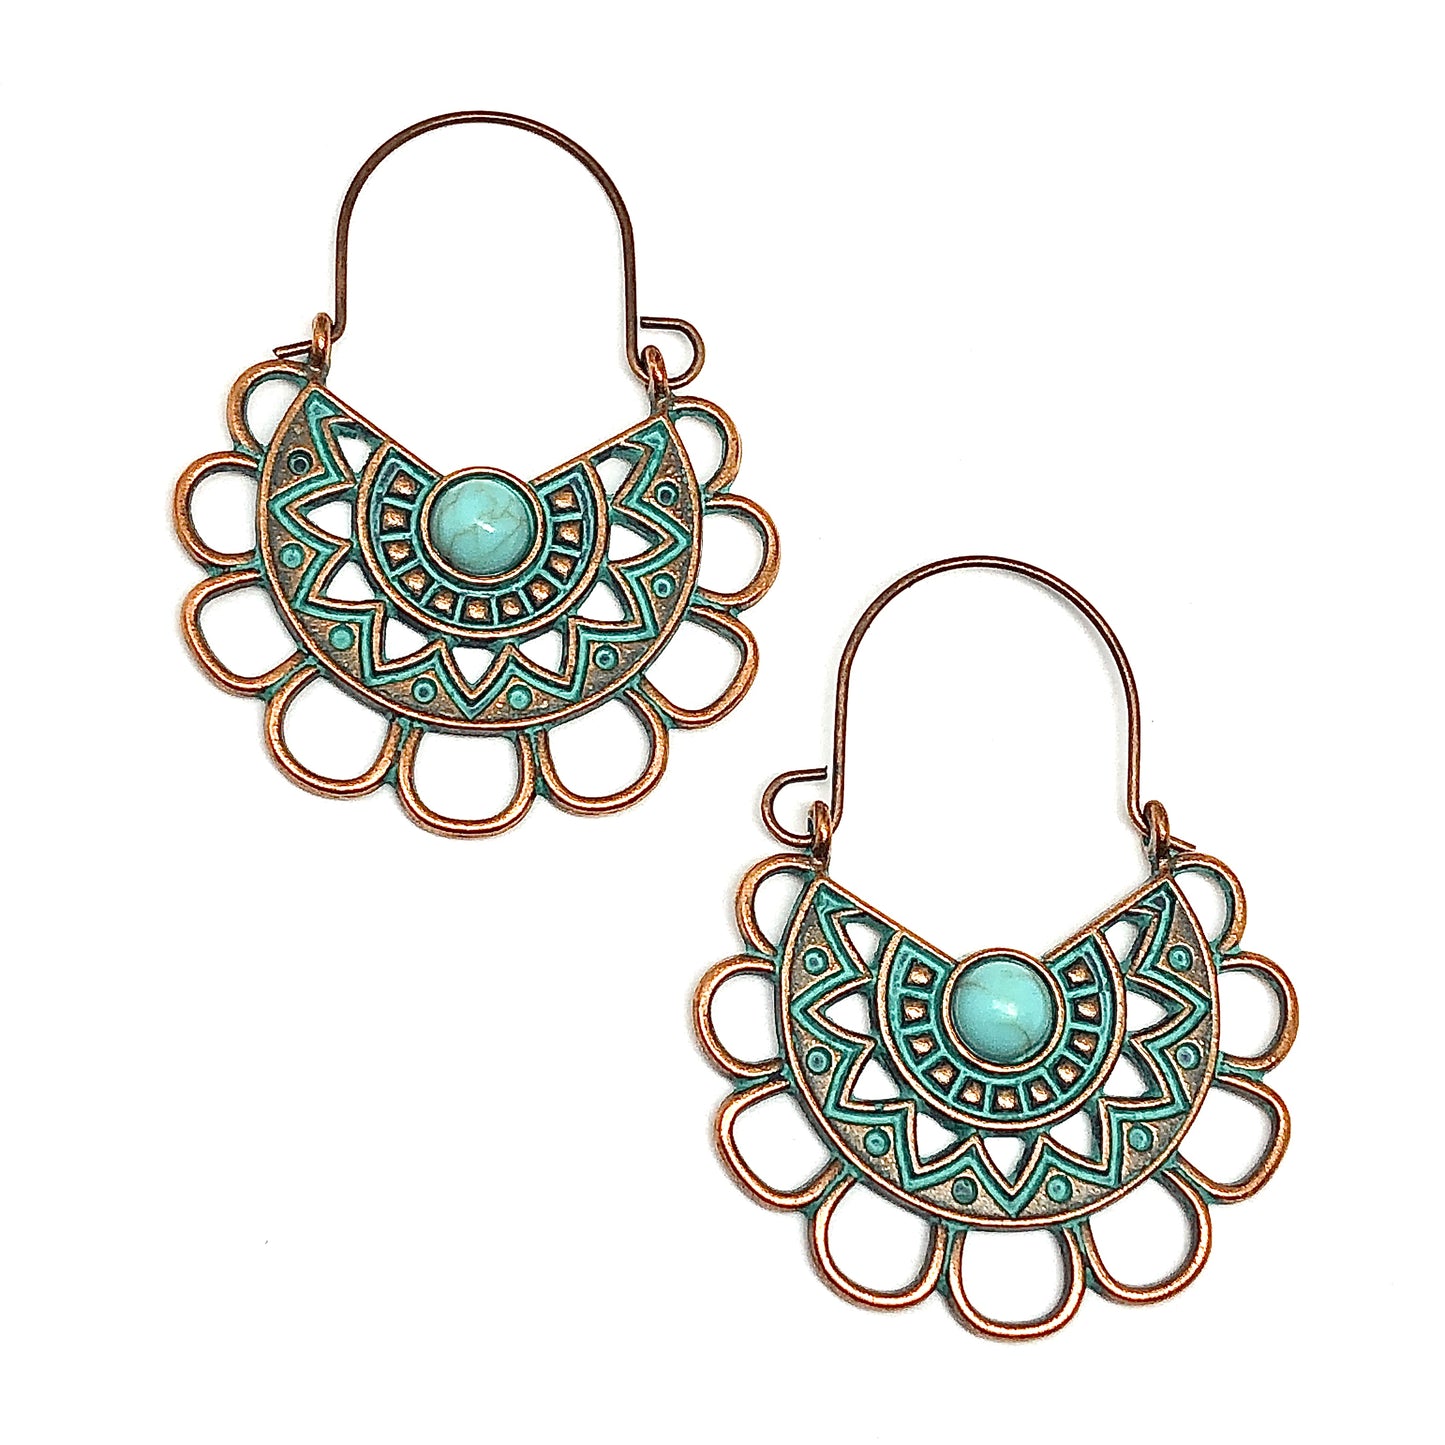 Hoop Earrings Scalloped Side Profile in Rustic Copper Turquoise Verdigris | USA Local Small Business